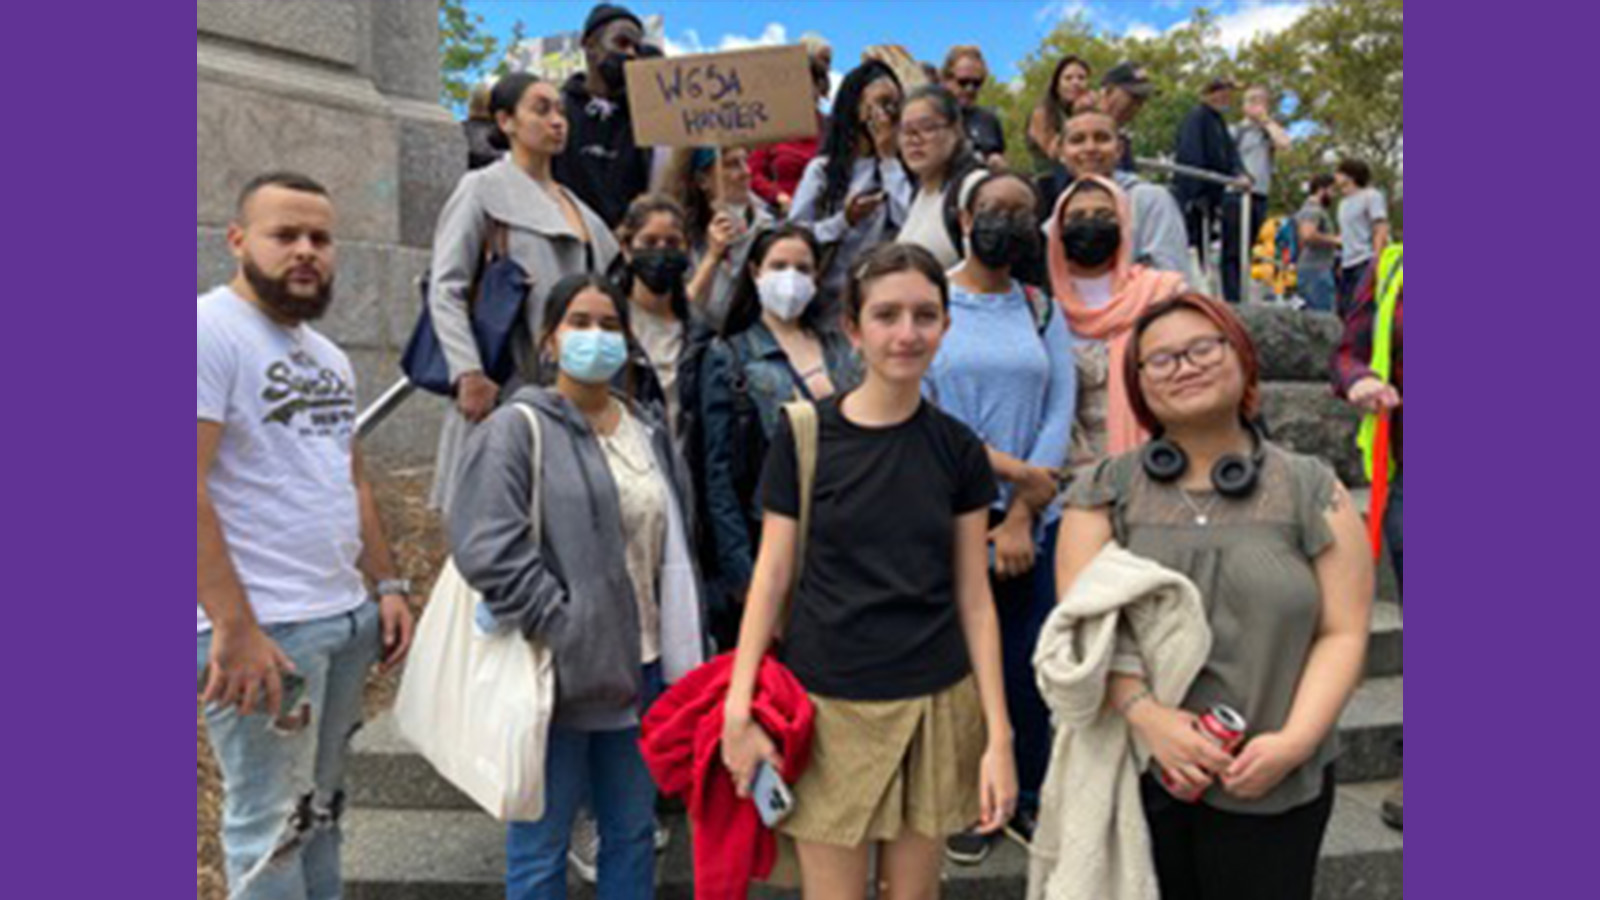 Students from WGSA 29004 Attended a Little Amal Walks NYC Event Sponsored by the Tenement Museum on Orchard Street, in the Lower East Side (Fall, 2022)